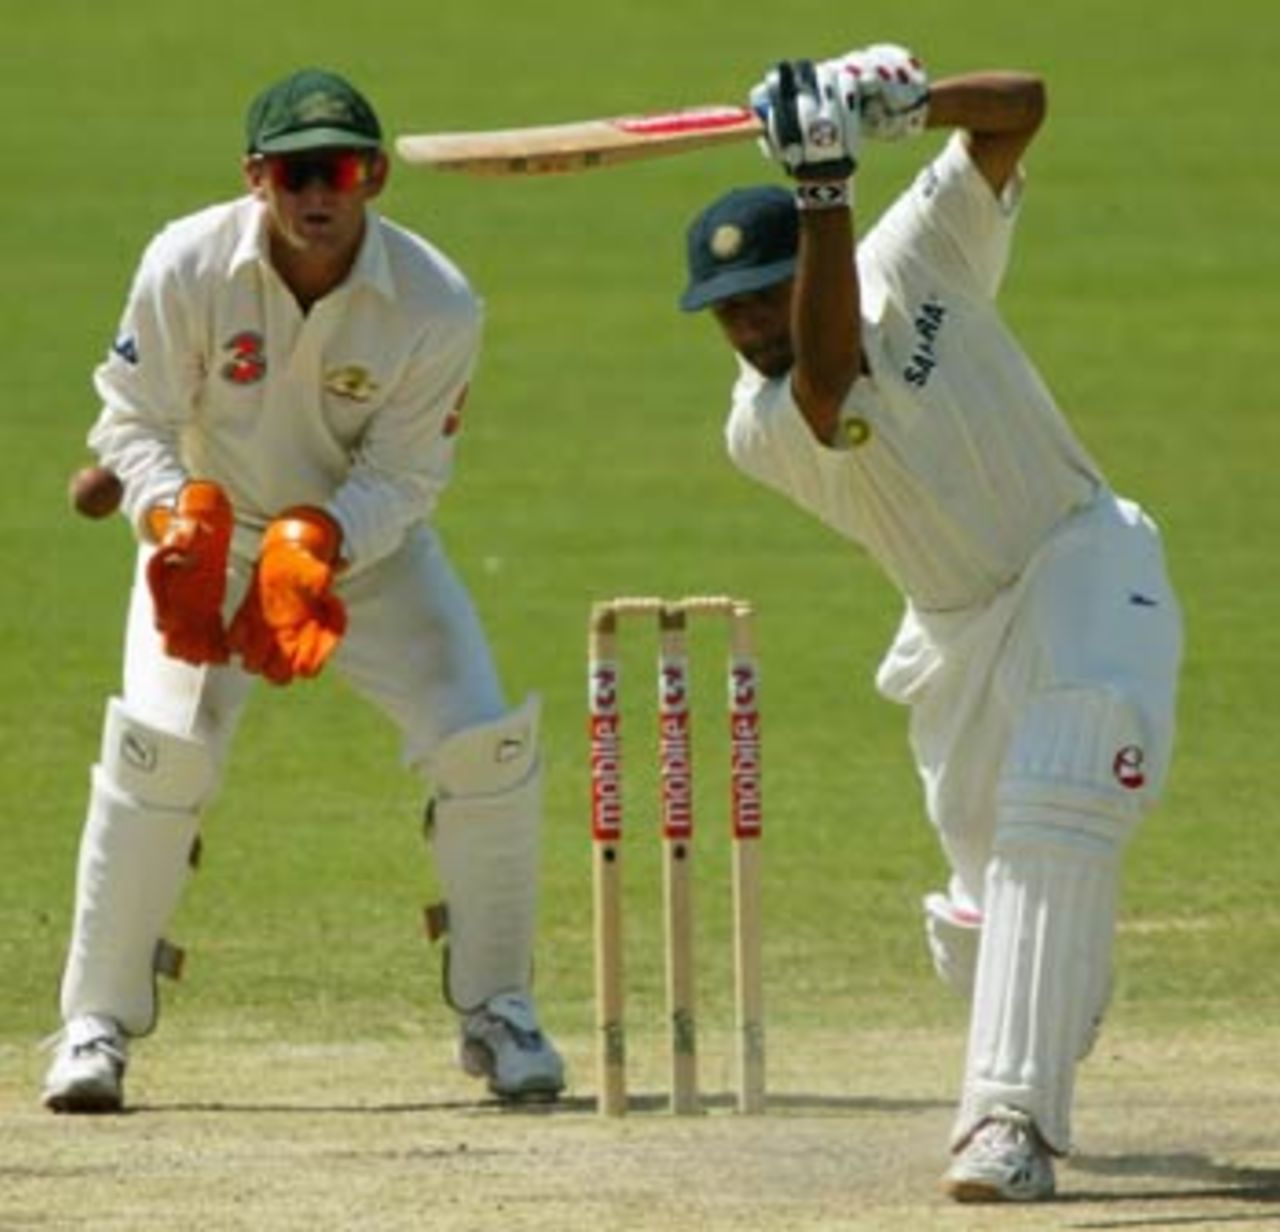 Dravid drove with authority, Australia v India, 2nd Test, Adelaide, 5th day, December 16, 2003